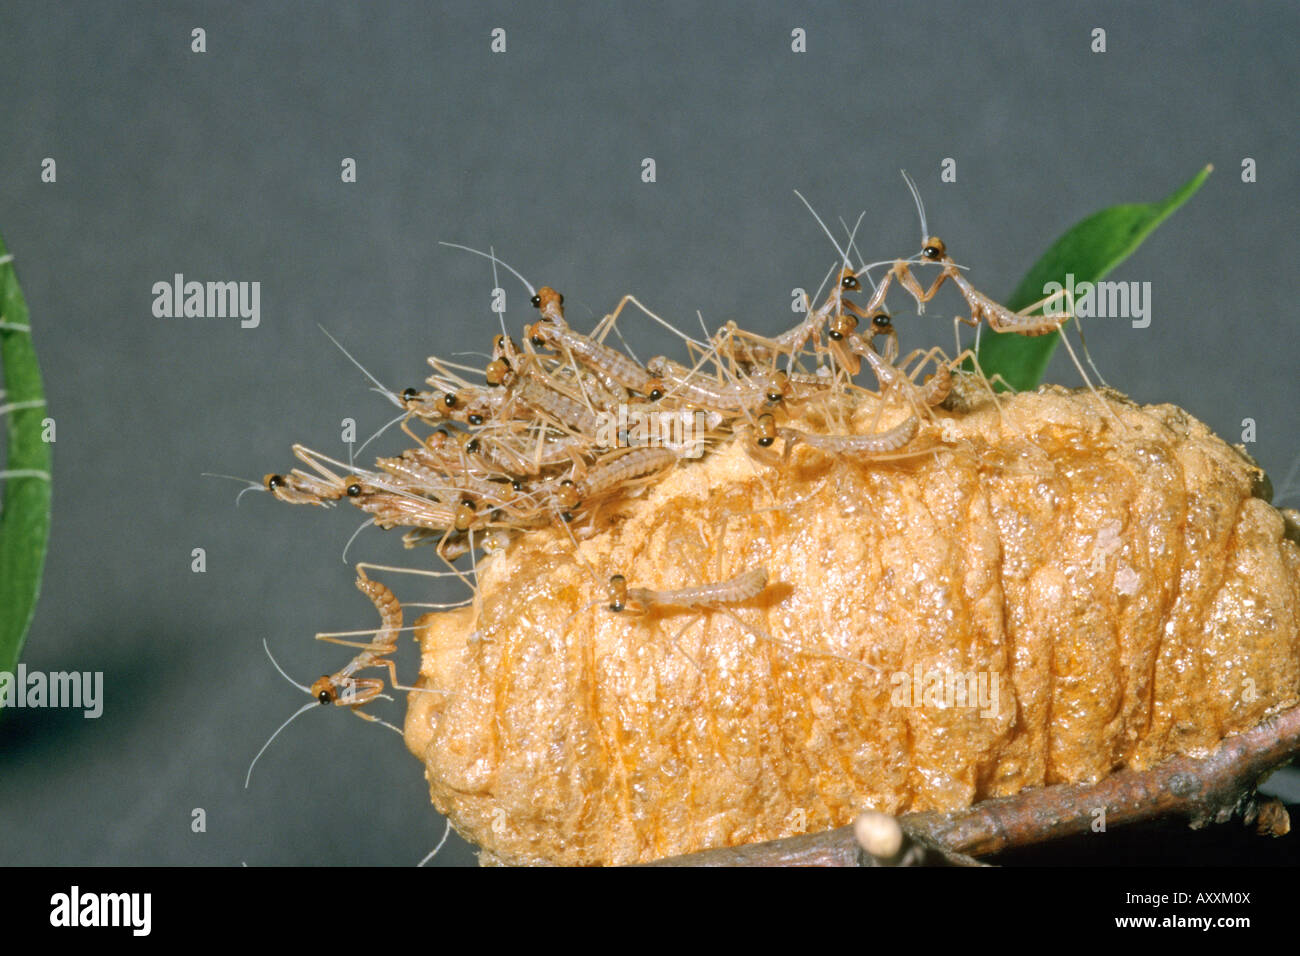 Budwing Mantis (Parasphendale agrionina), ninfe emergenti dal caso di uovo (ootheca) Foto Stock